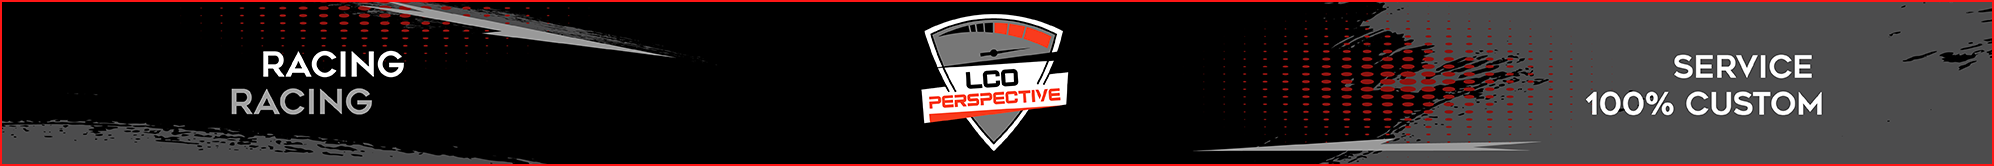 LCO perspective